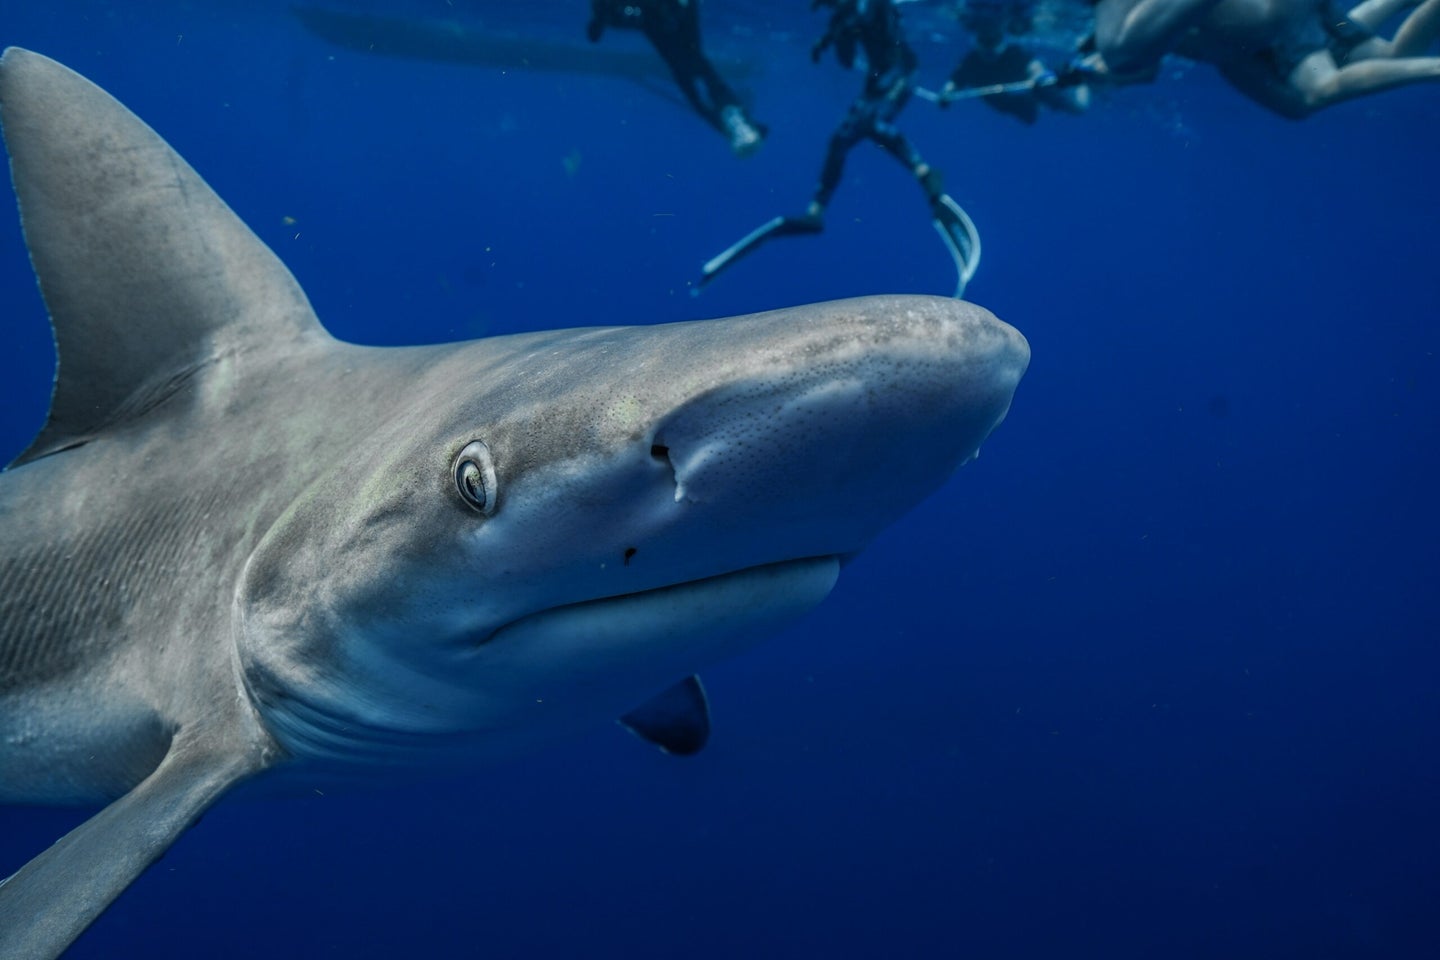 Sharks are worthy of protection—not so much fear. 